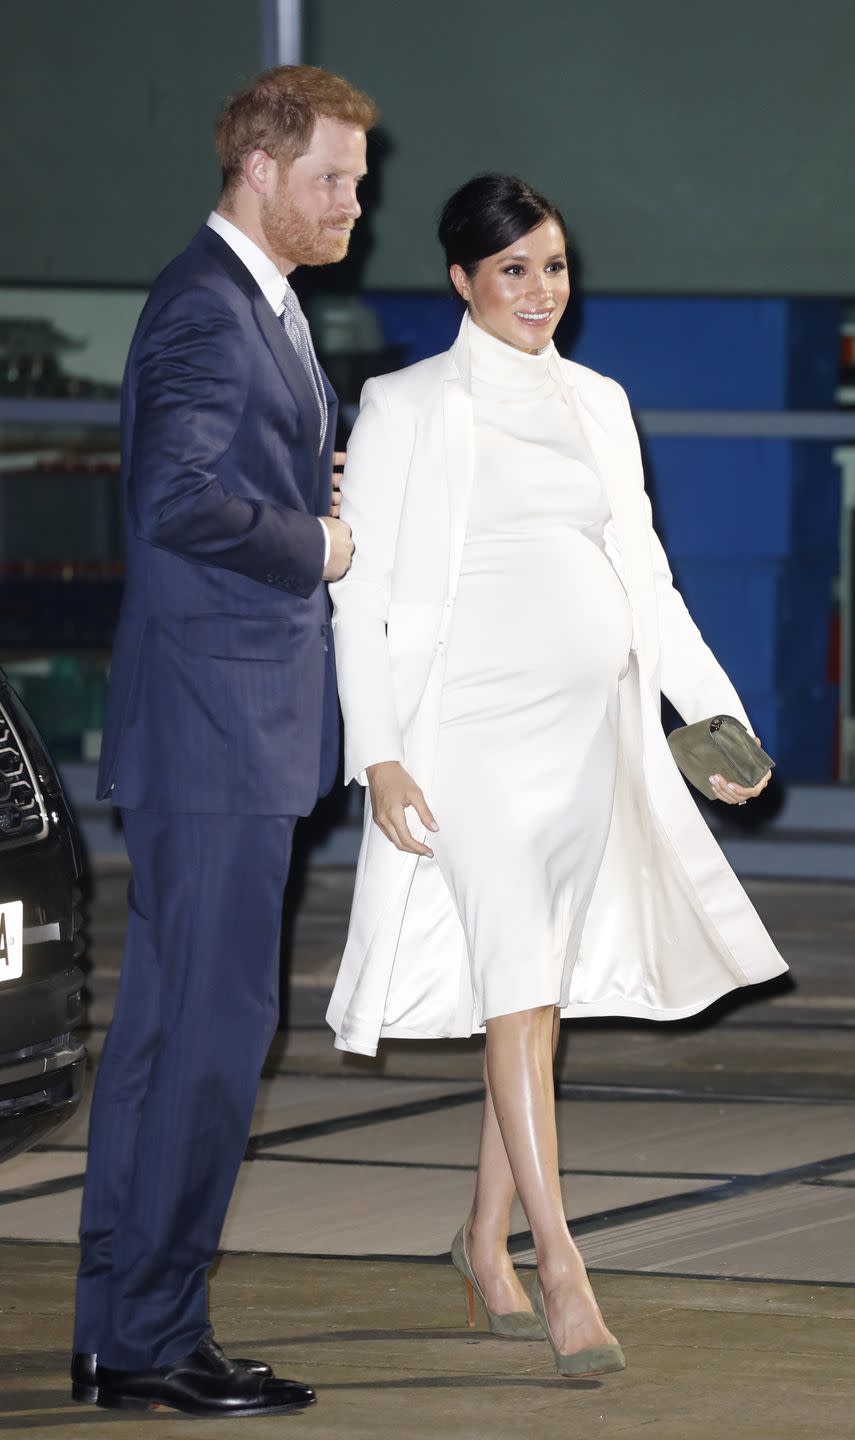 The Duke and Duchess arrive at the Natural History Museum.